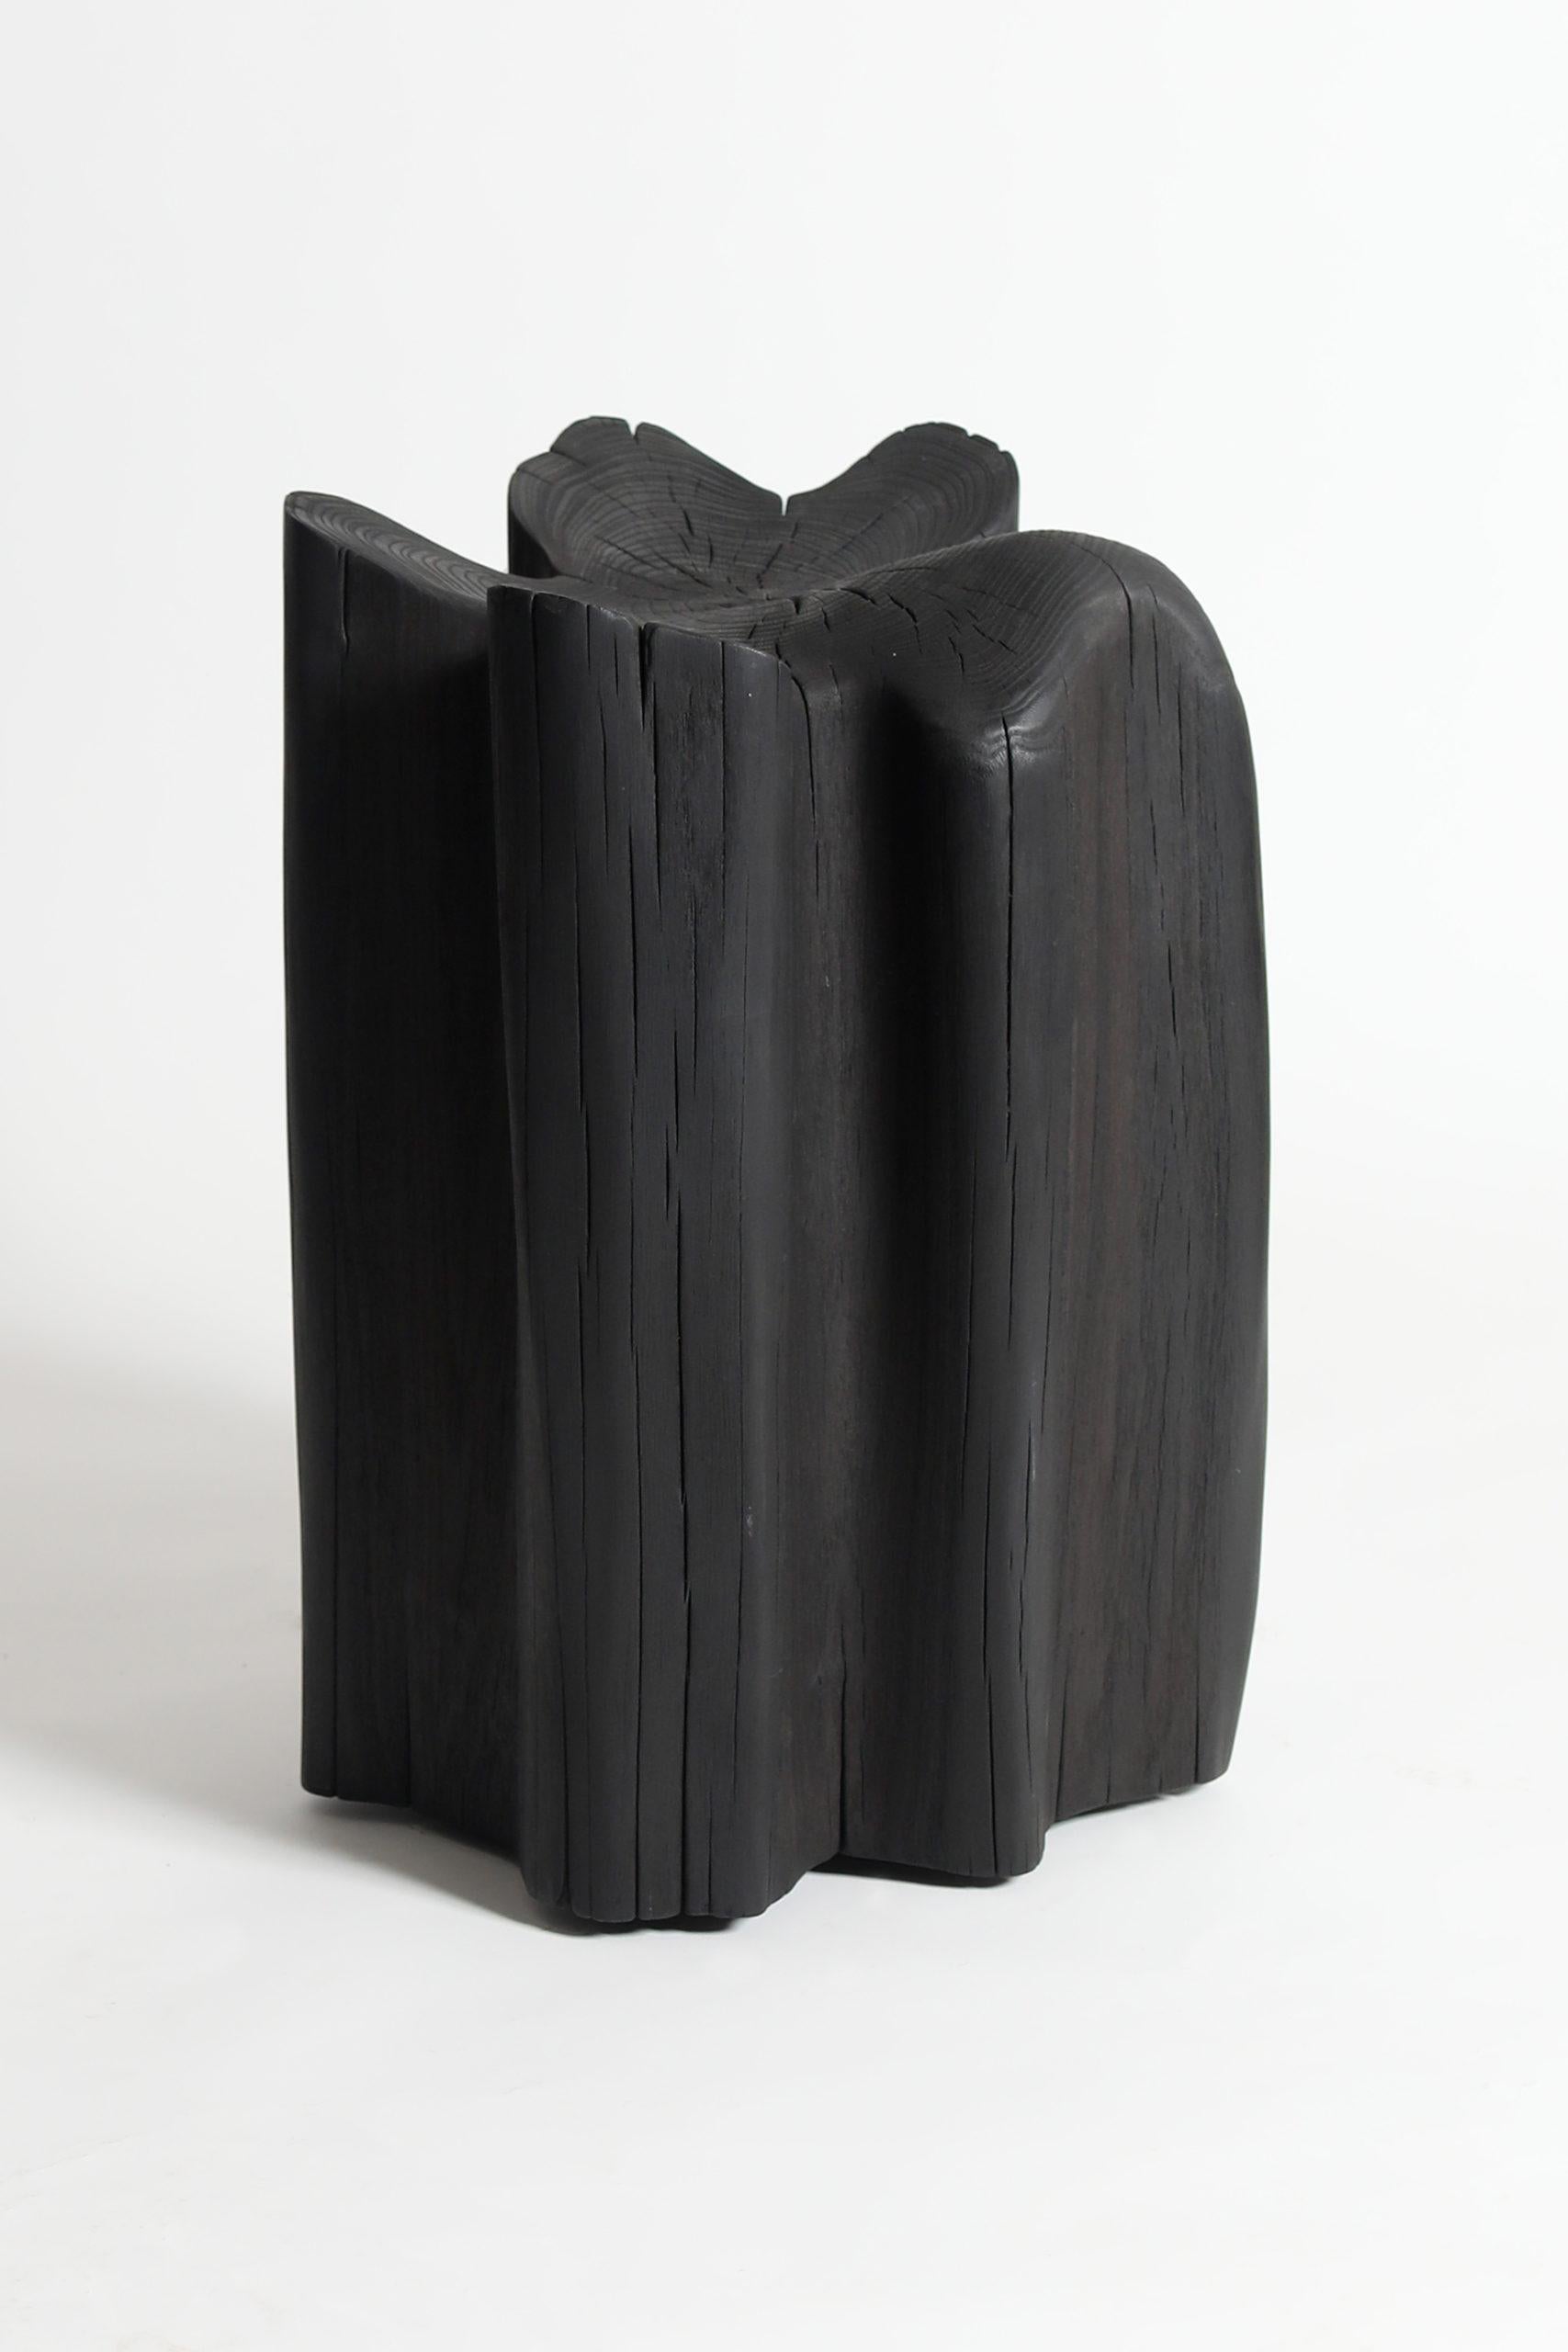 Contemporary black wooden stool, Burned Chunk by Jesse Sanderson for WDSTCK

Design: Jesse Sanderson
Material: Burned acacia wood
Features: Invisible wheels
Dimensions: height 47 cm

Handcrafted in The Netherlands

In search of a way to emphasize